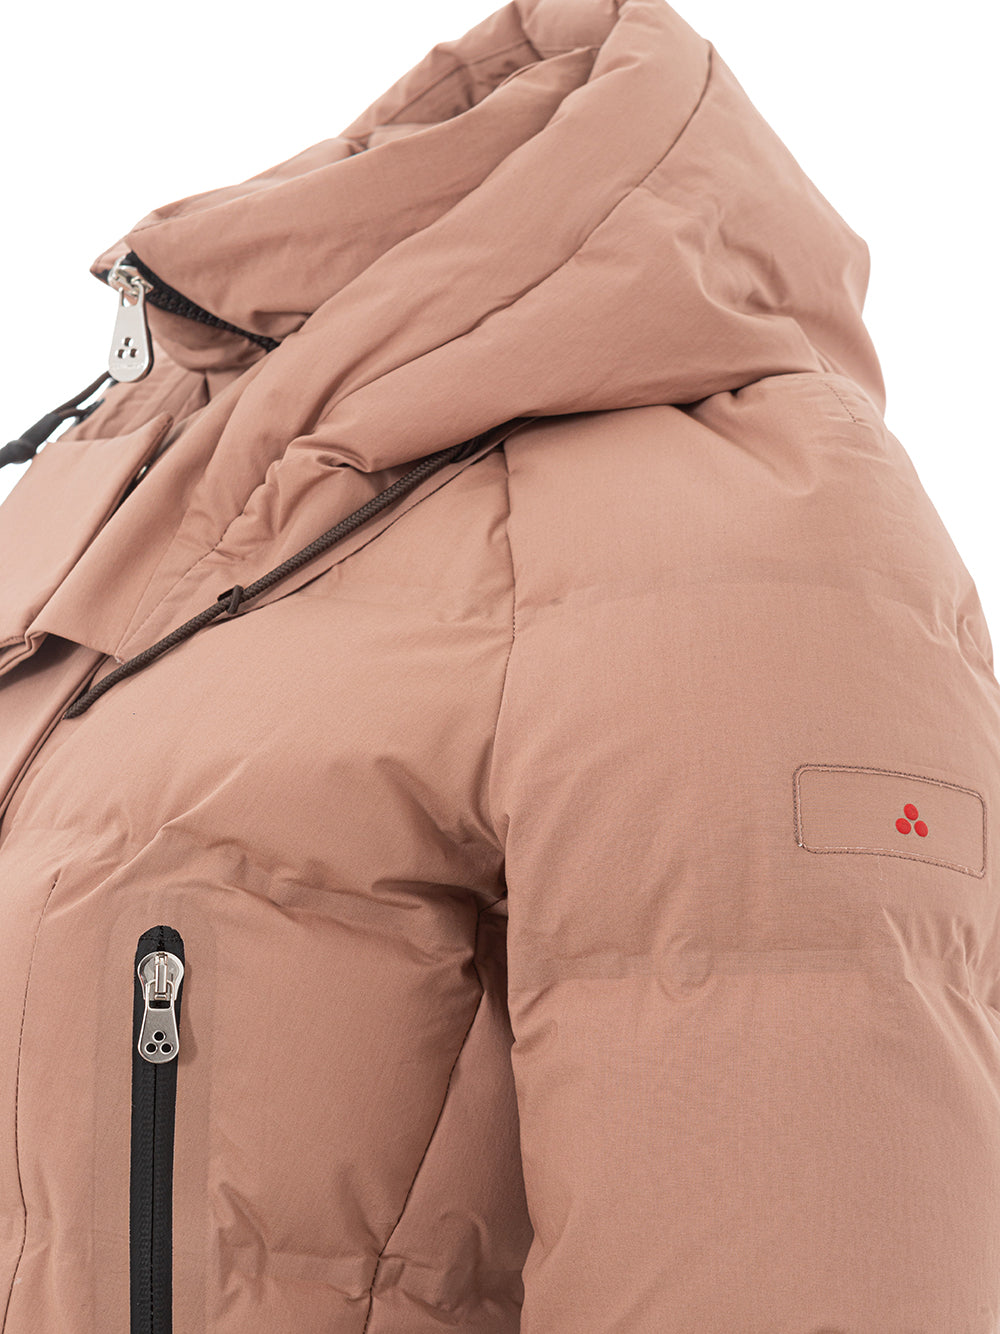 Peuterey Light Pink Puffy Quilted Jacket - DEA STILOSA MILANO